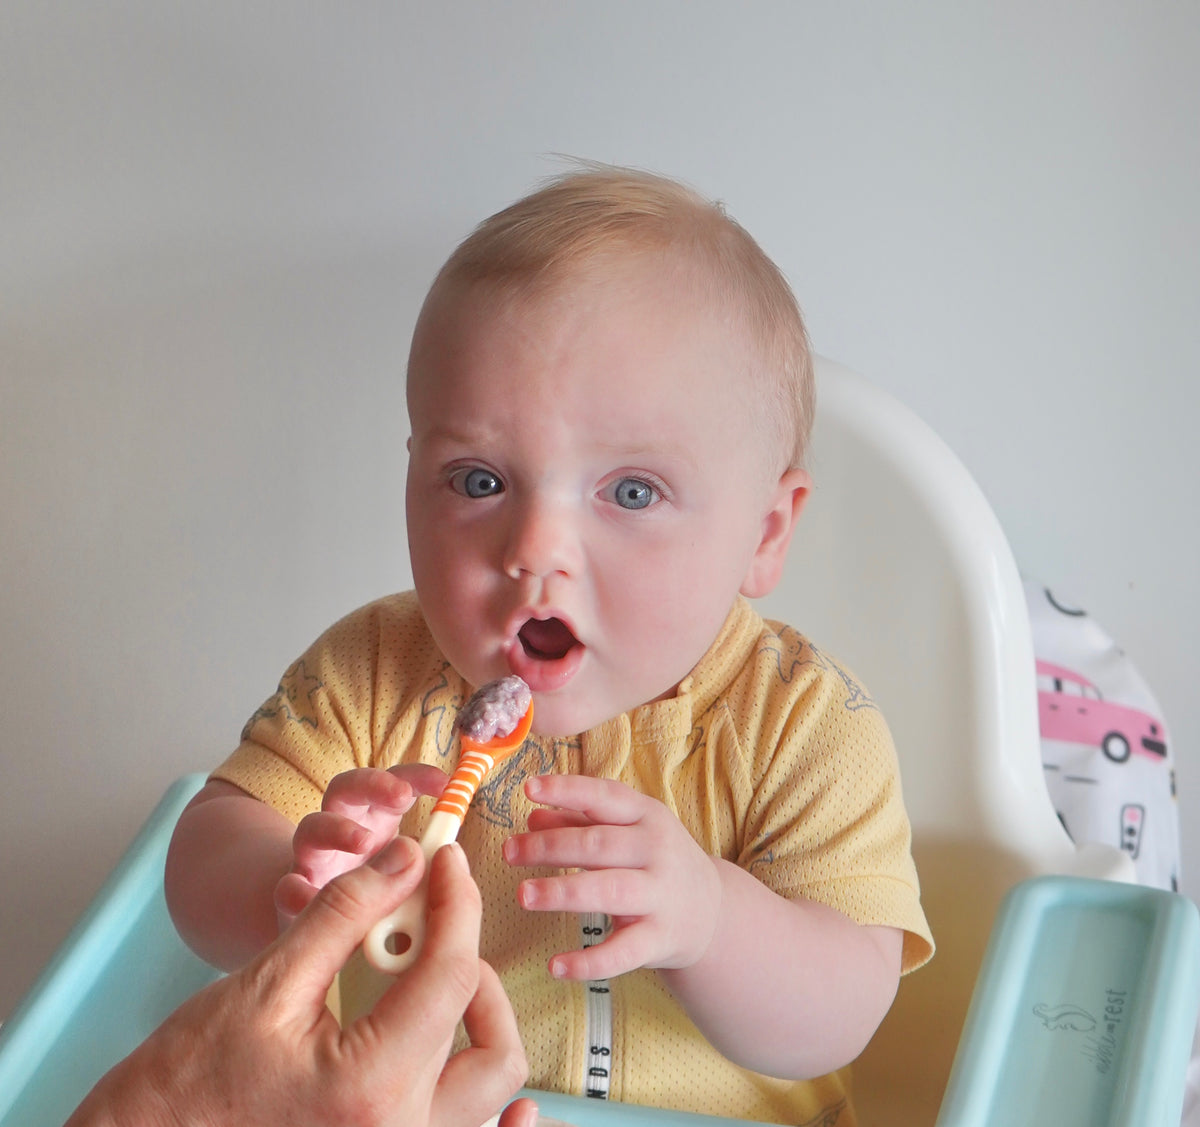 Baby being fed by mother using First Feeding Spoons, orange